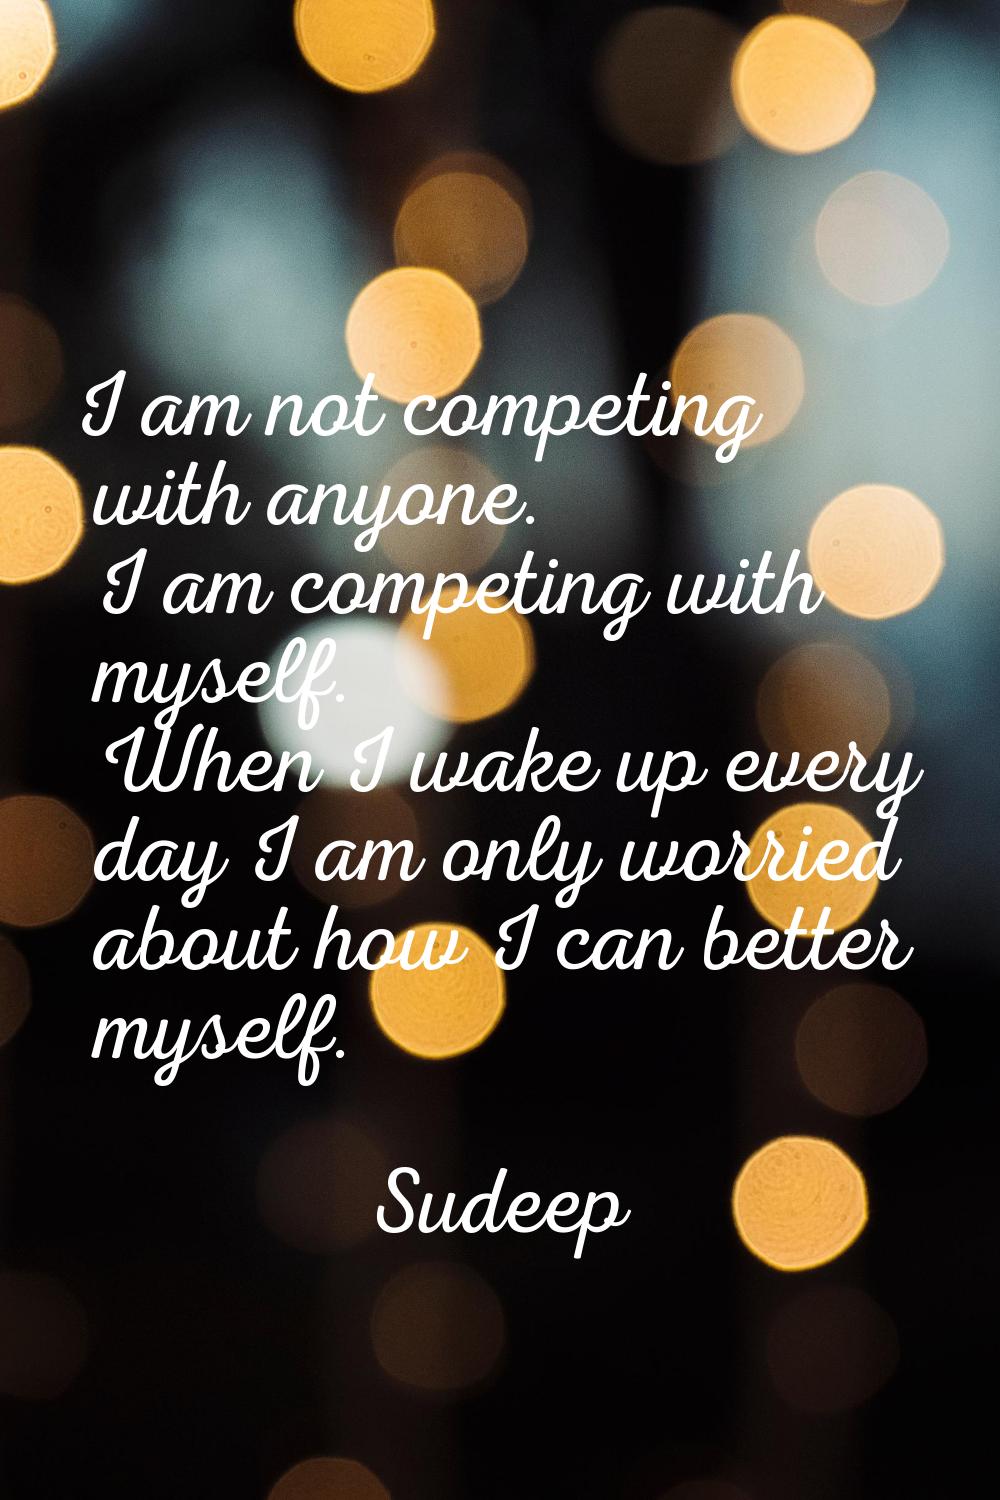 I am not competing with anyone. I am competing with myself. When I wake up every day I am only worr